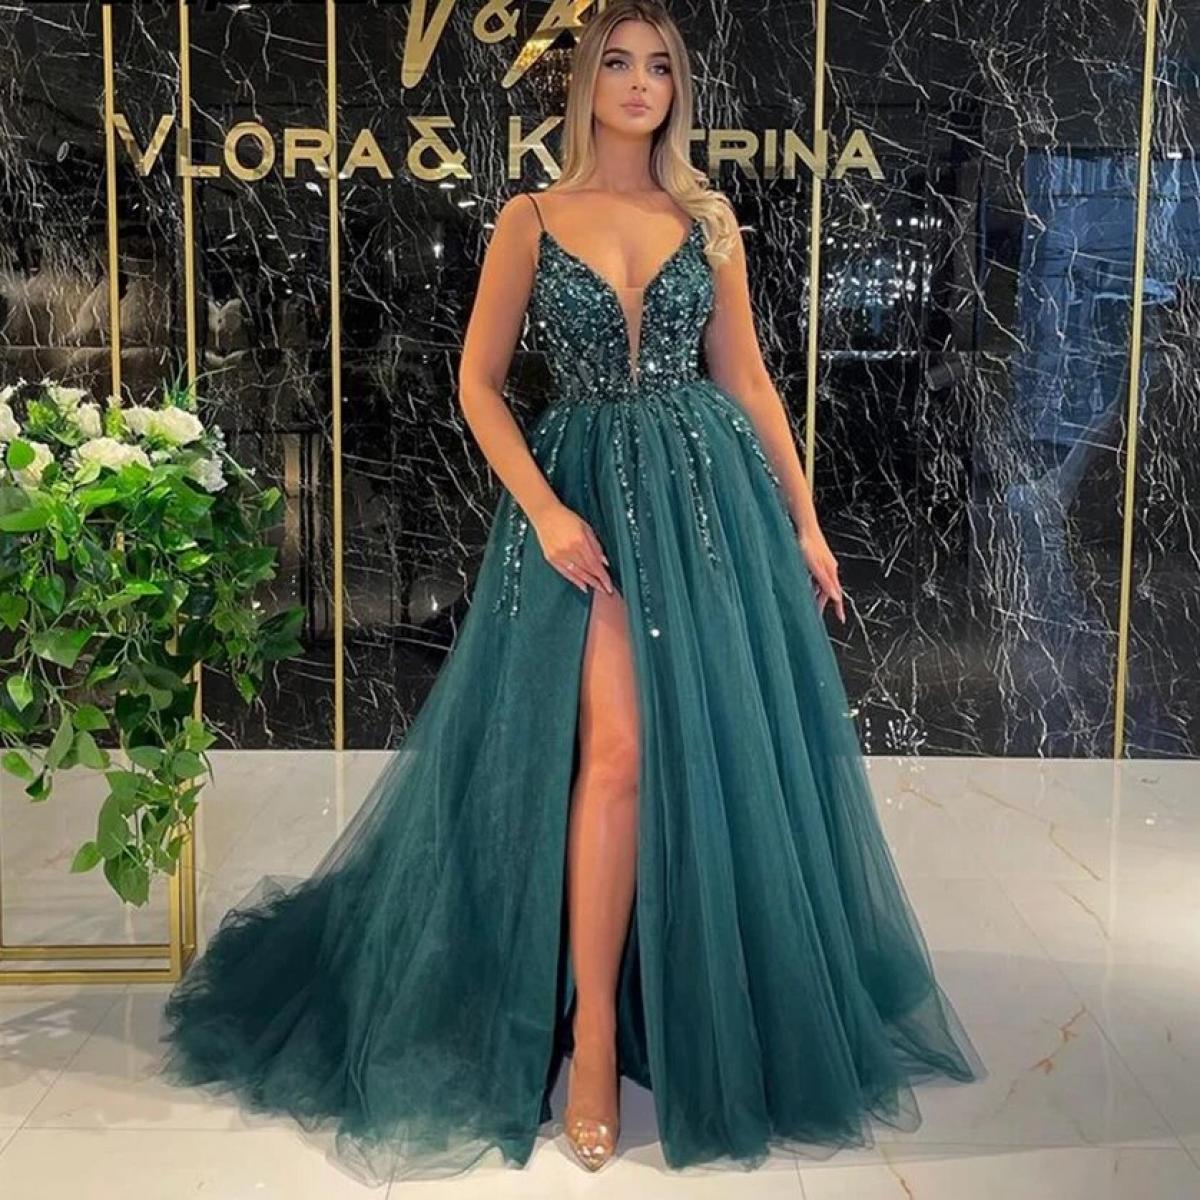 Beading Crystal Long Evening Dresses 2023  V Neck Plunging Sheer Spaghetti Straps Side Slit Formal Prom Party Gown For W